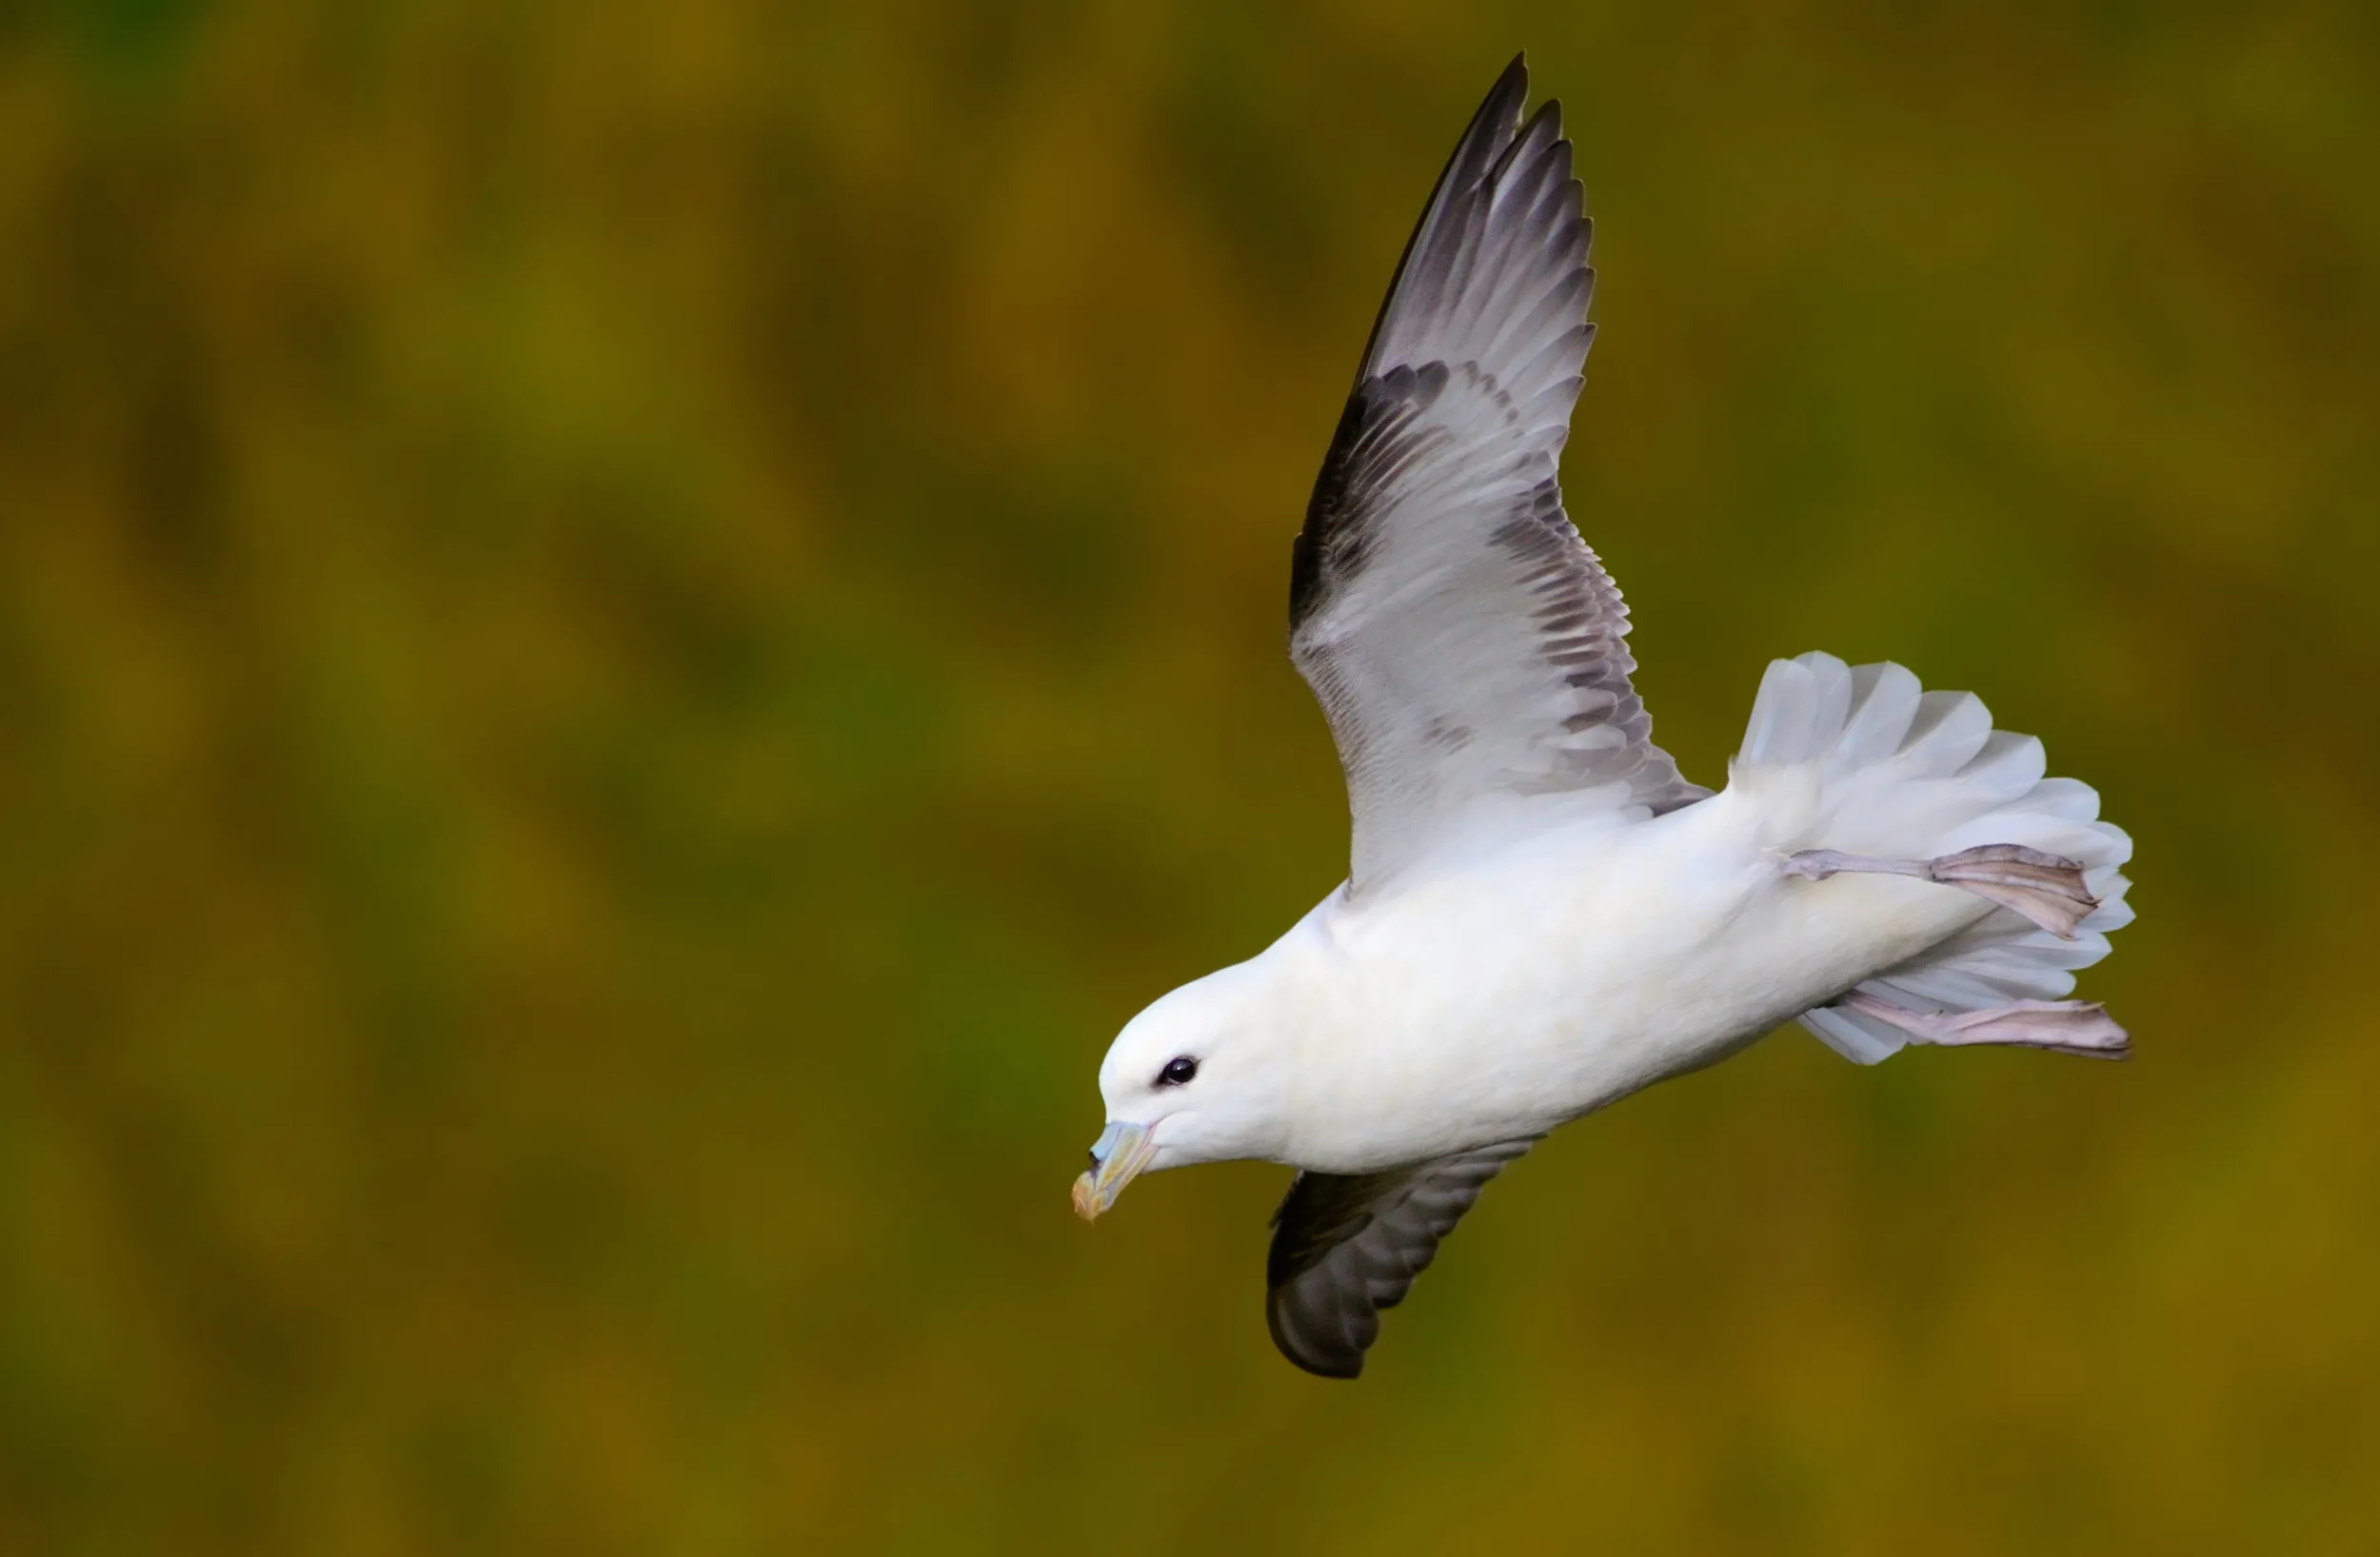 Lone Fulmar mid flight, in front of a green cliff face.